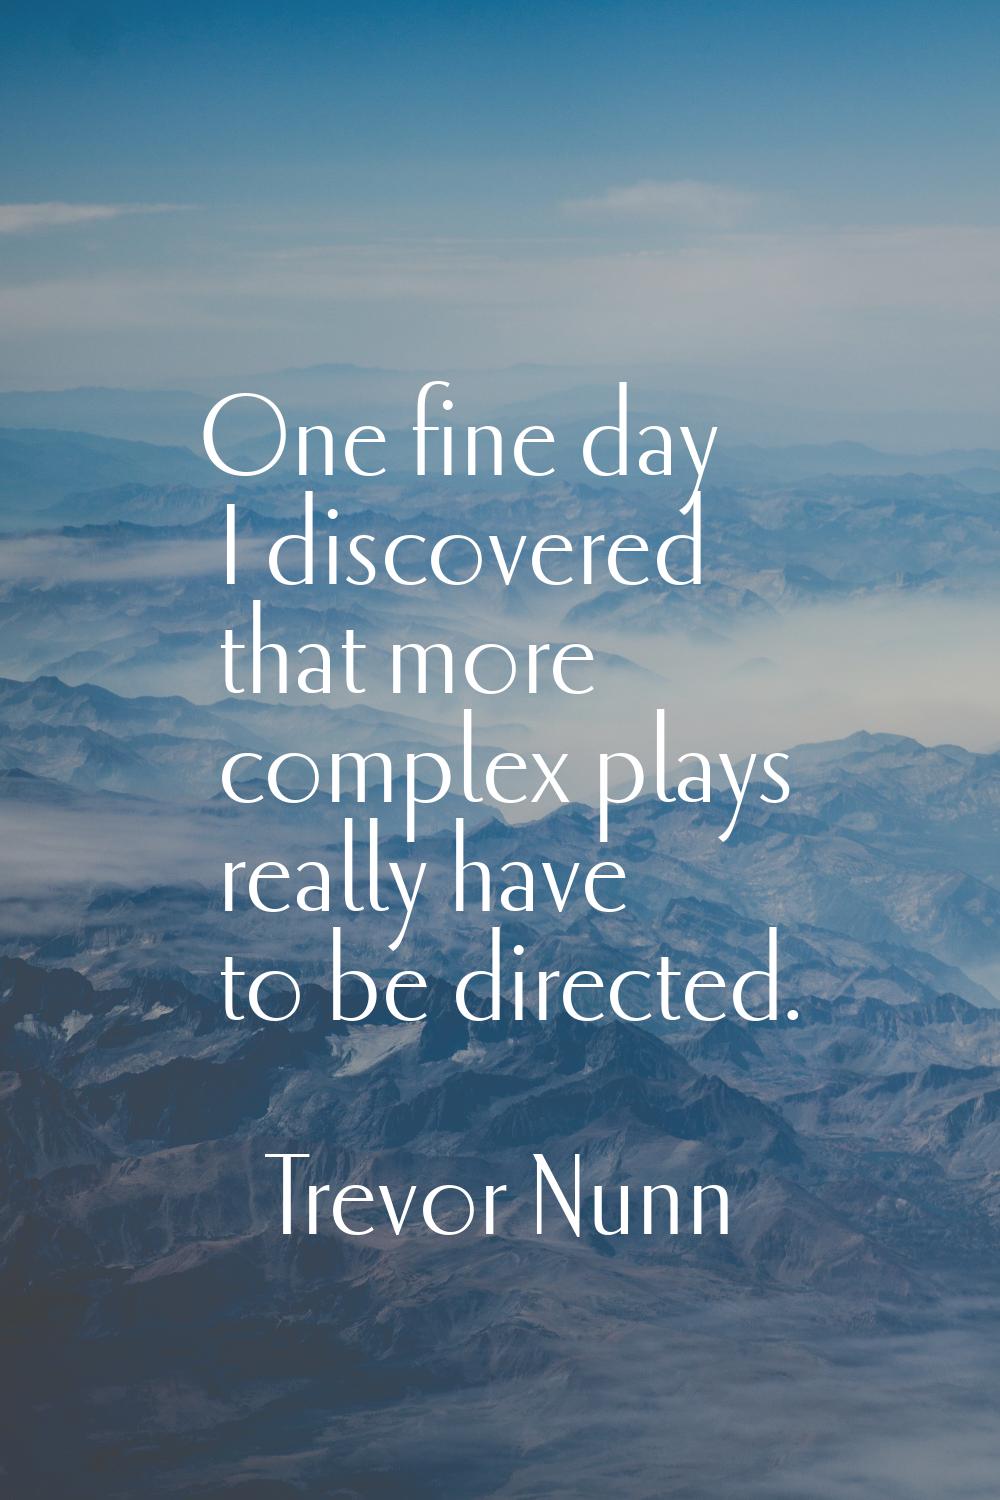 One fine day I discovered that more complex plays really have to be directed.